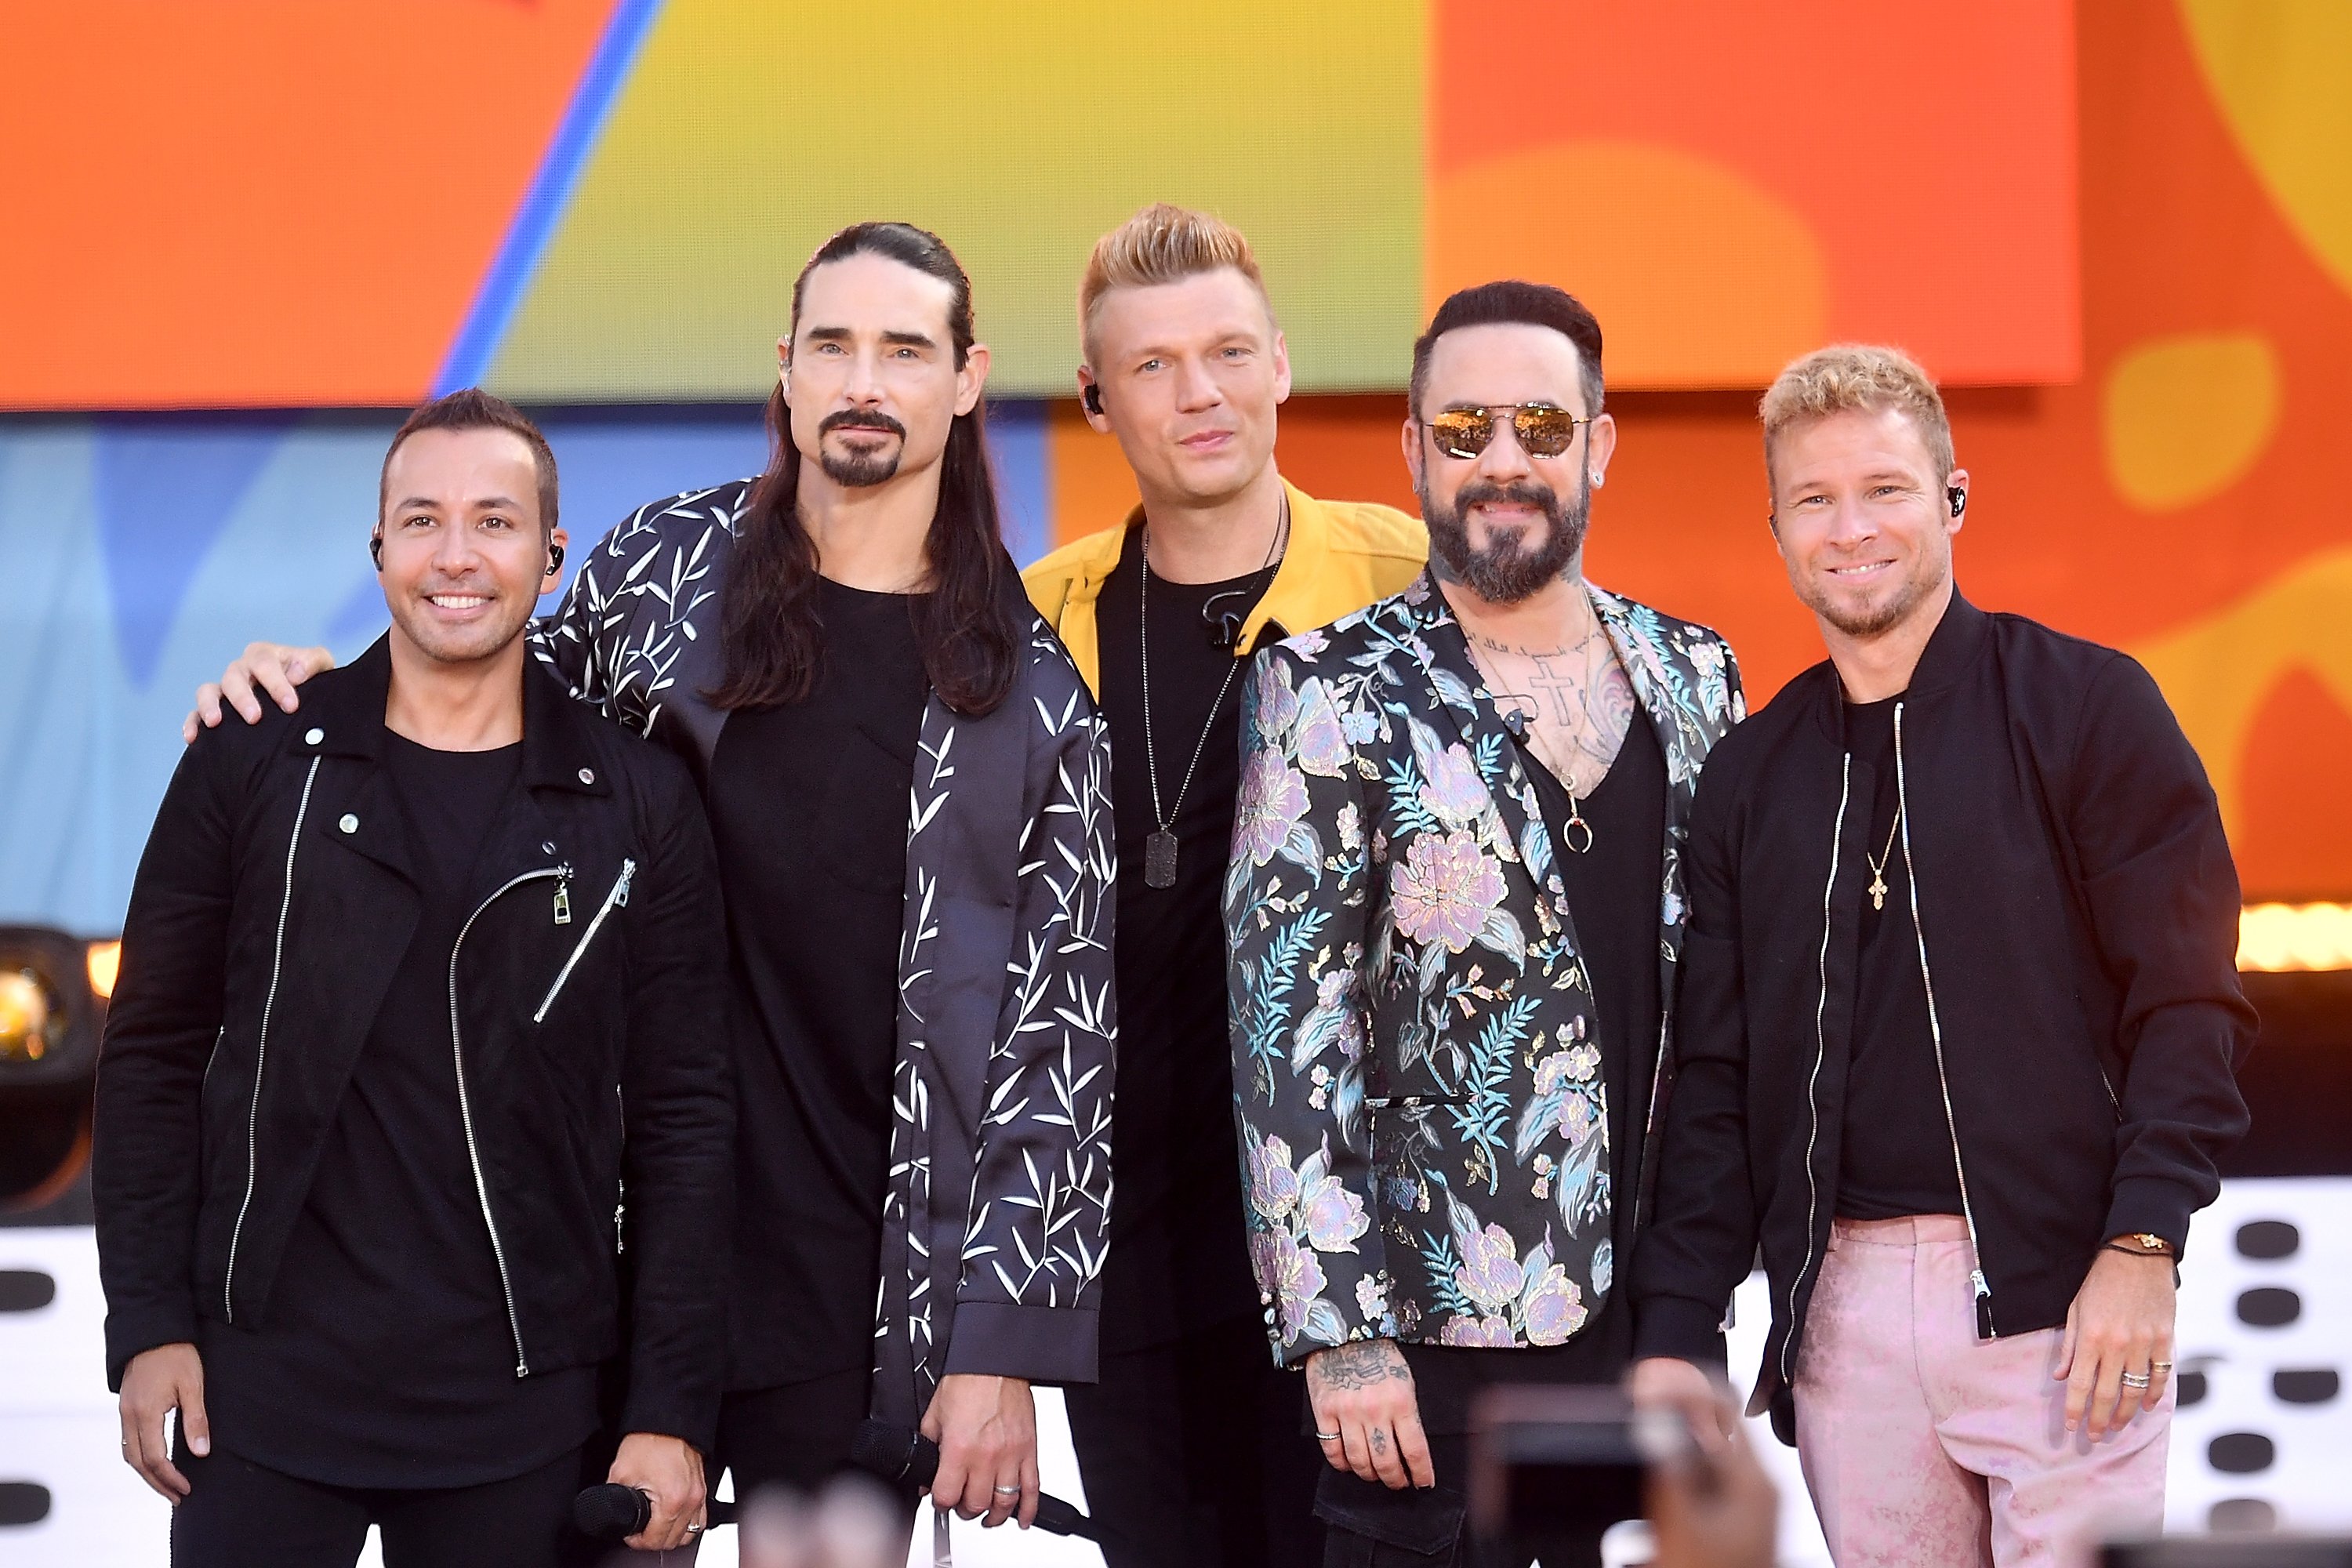 Backstreet Boys perform on ABC's "Good Morning America" at SummerStage at Rumsey Playfield, Central Park on July 13, 2018 in New York City. | Photo: GettyImages